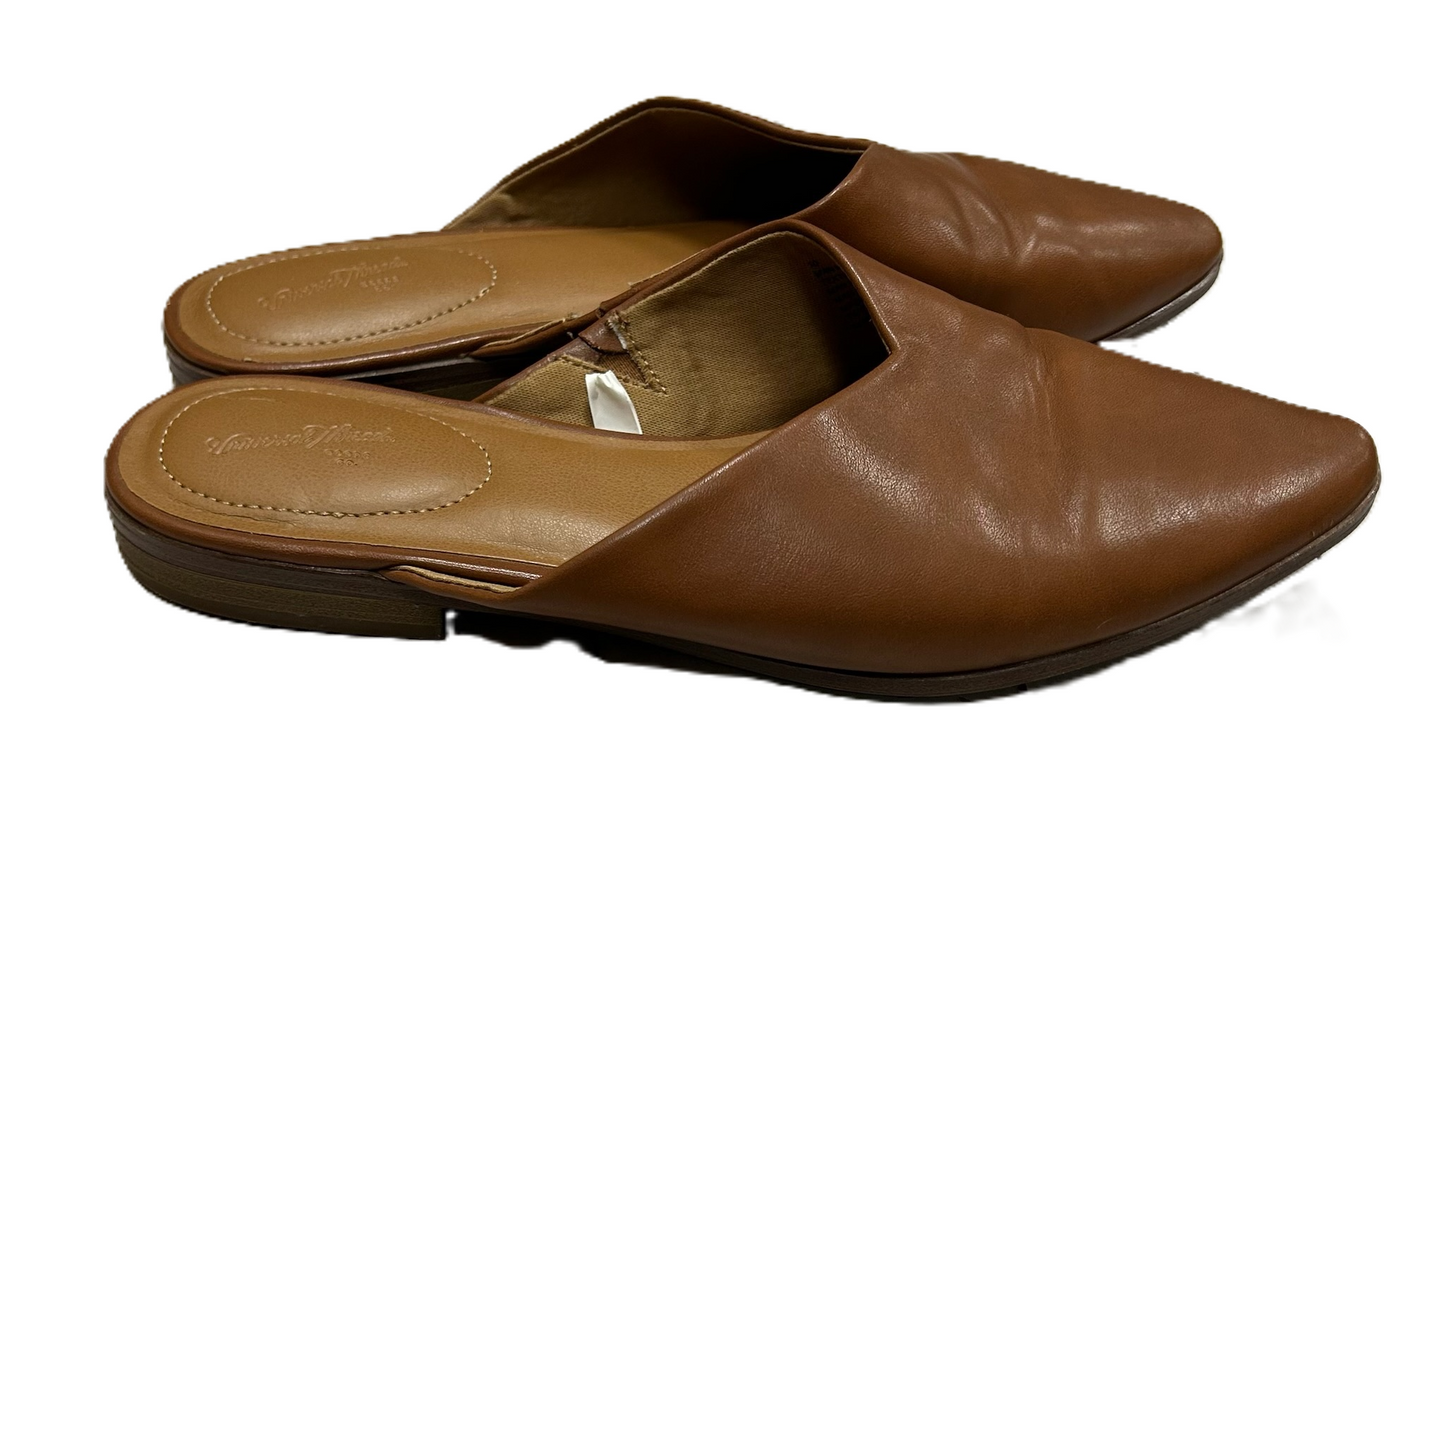 Brown Shoes Flats By Universal Thread, Size: 10